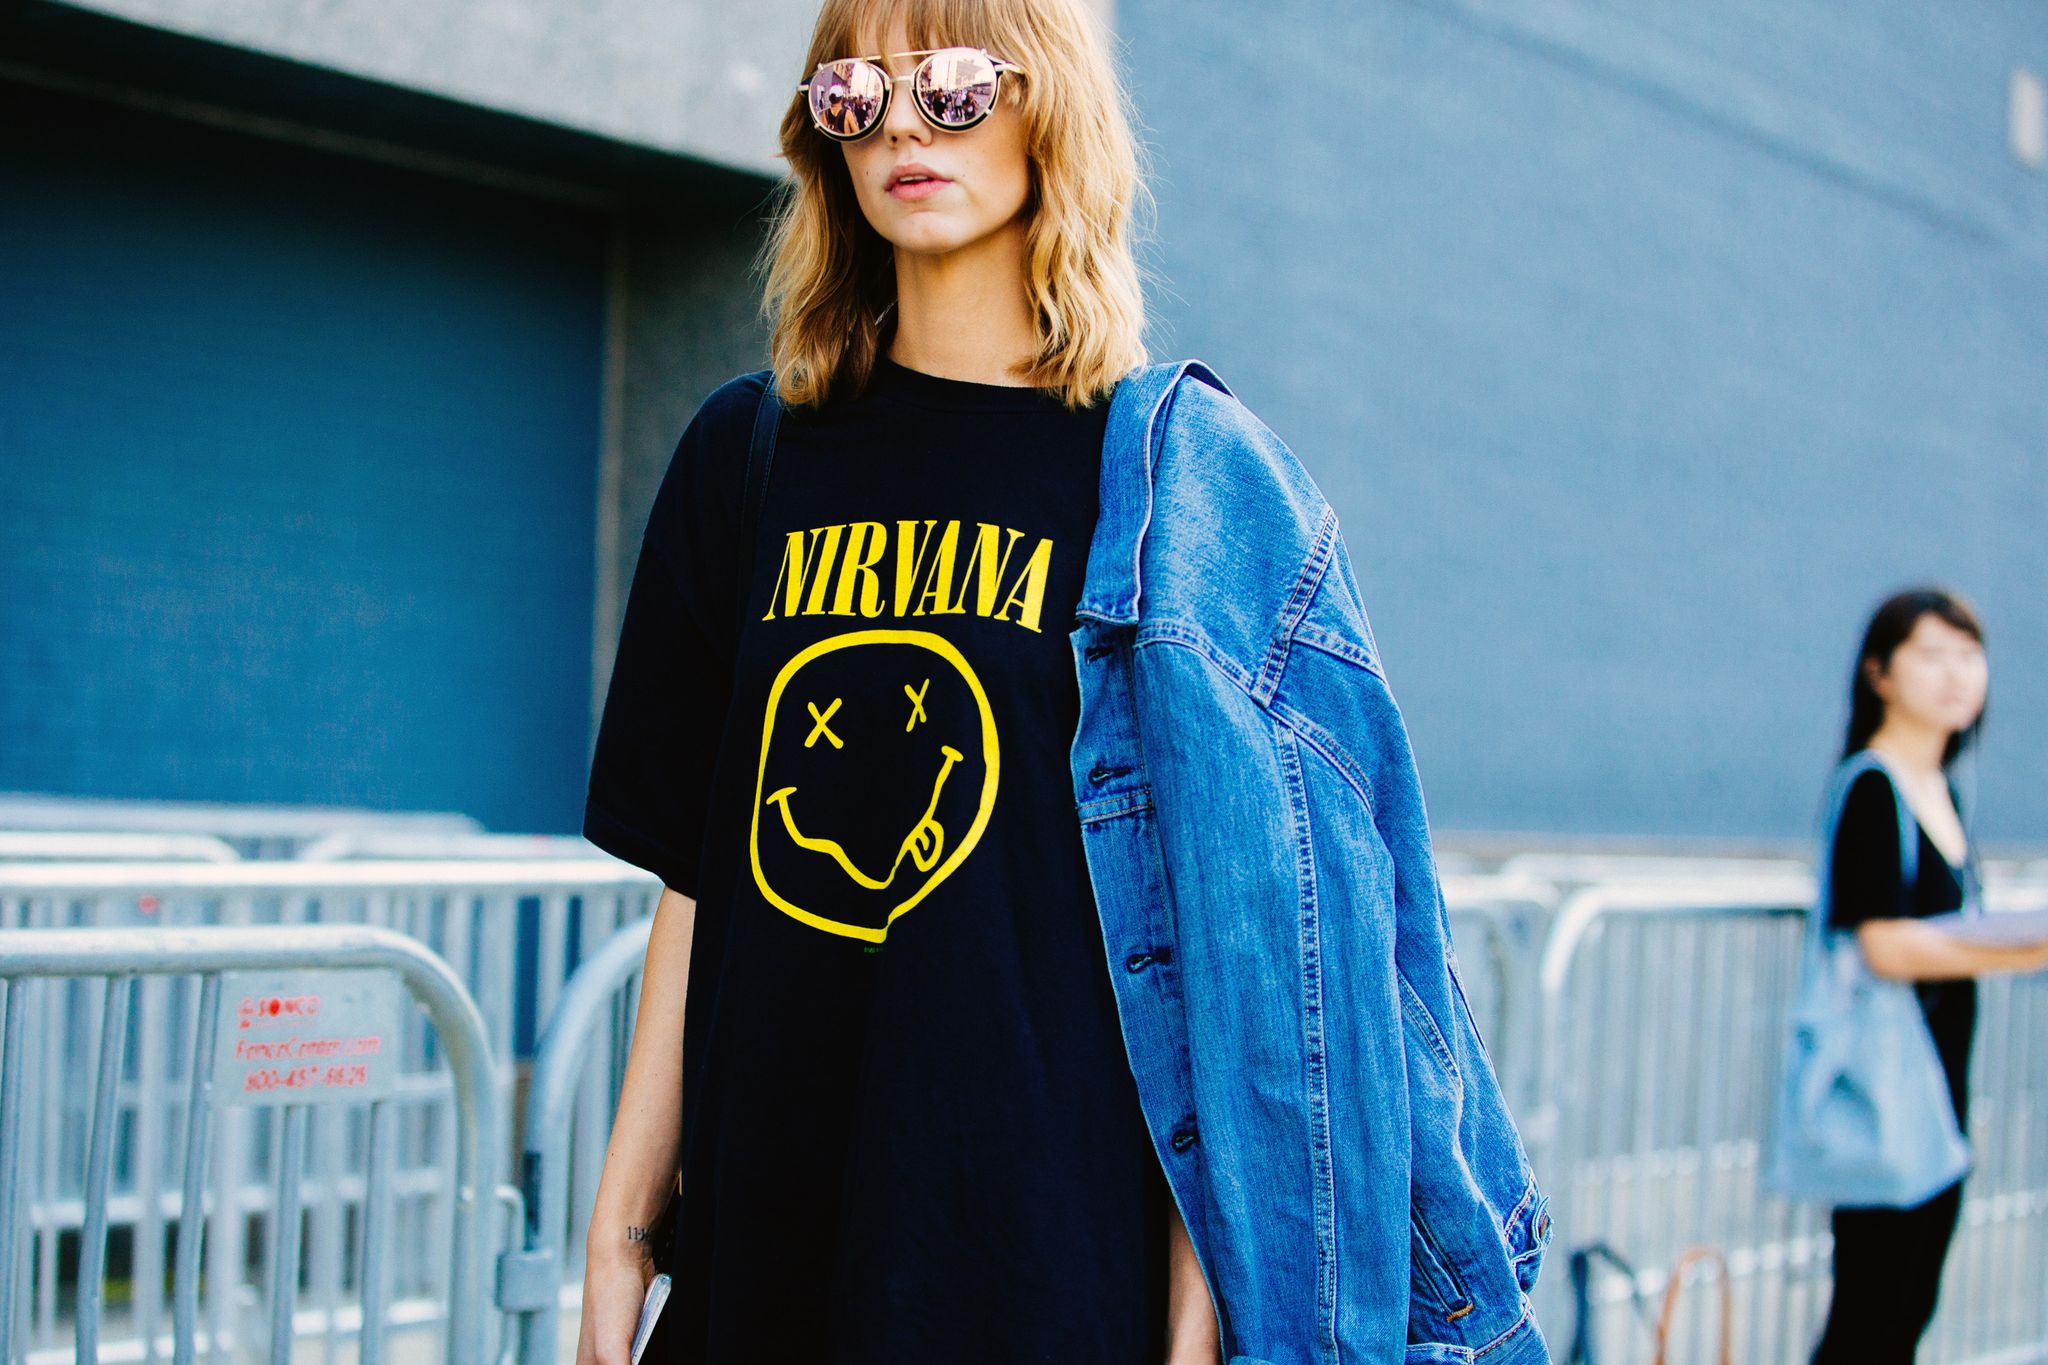 model michi delane wears vintage style reflective sunglasses, a black nirvana t shirt, and a denim jacket off her shoulder after the lacoste show at spring studios on september 10, 2016 in new york city